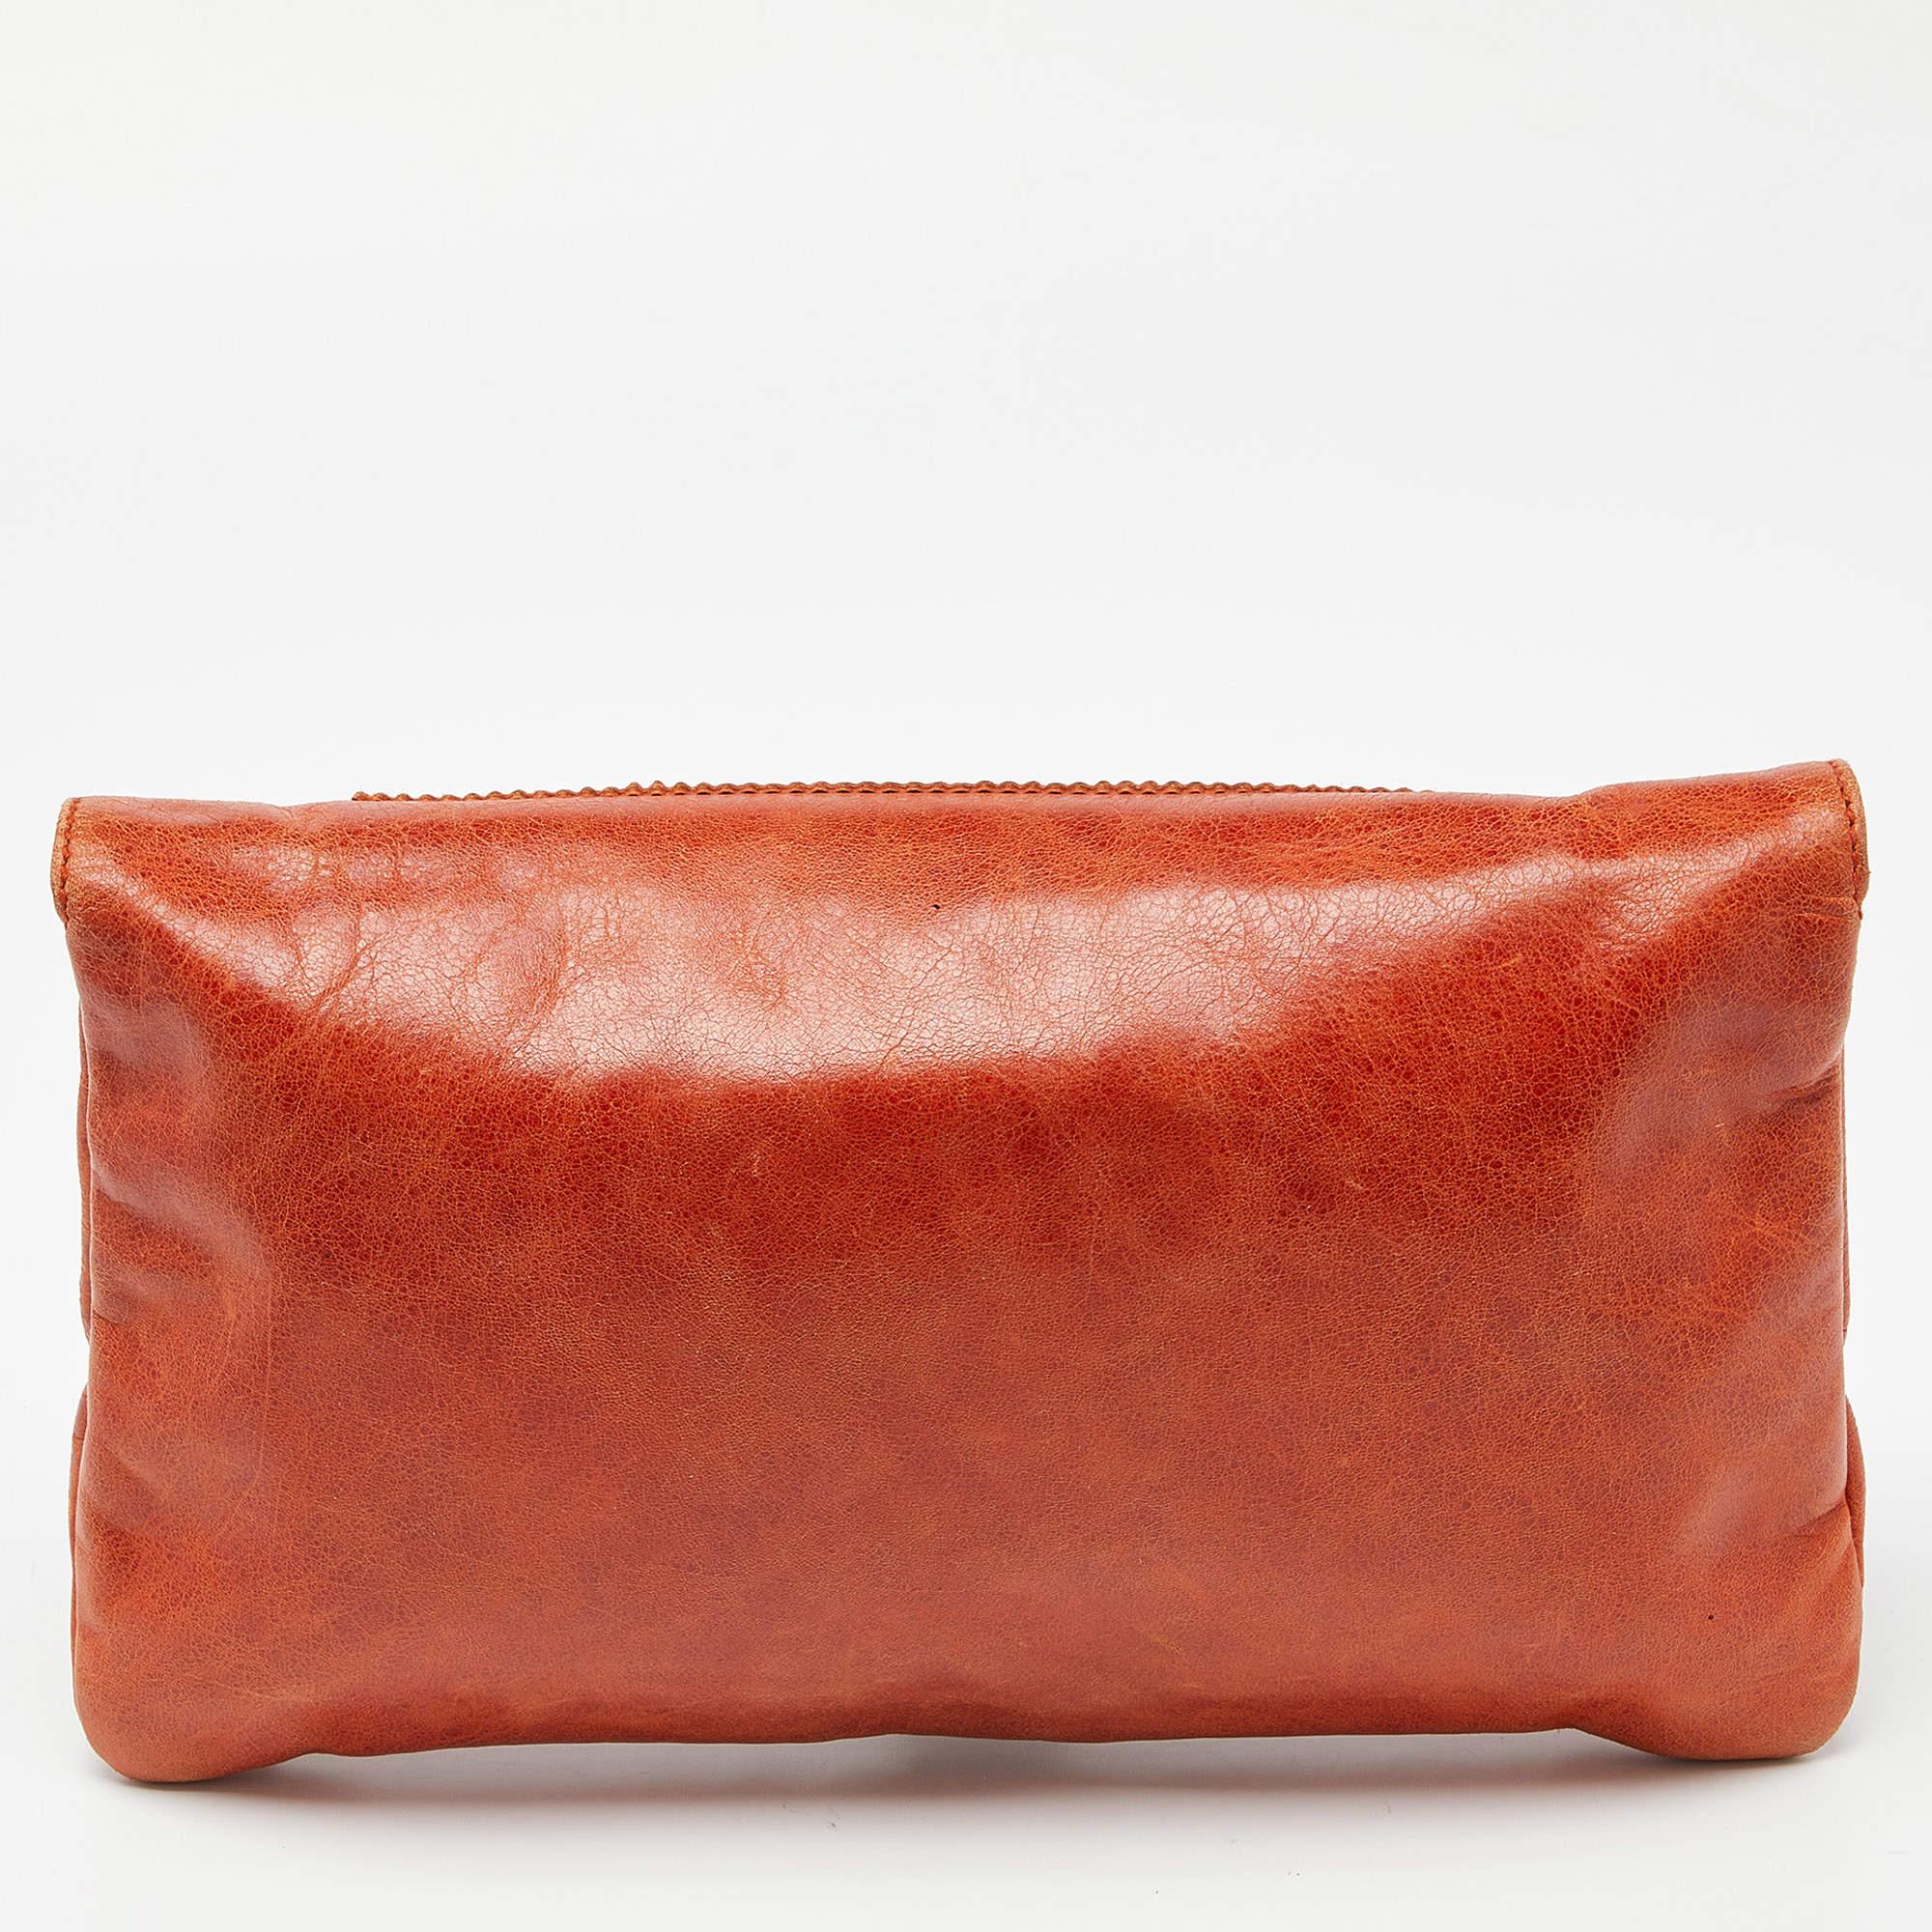 This designer clutch for women has the kind of design that ensures high appeal, whether held in your hand or tucked under your arm. It is a meticulously-crafted piece bound to last a long time.

Includes: Pocket Mirror